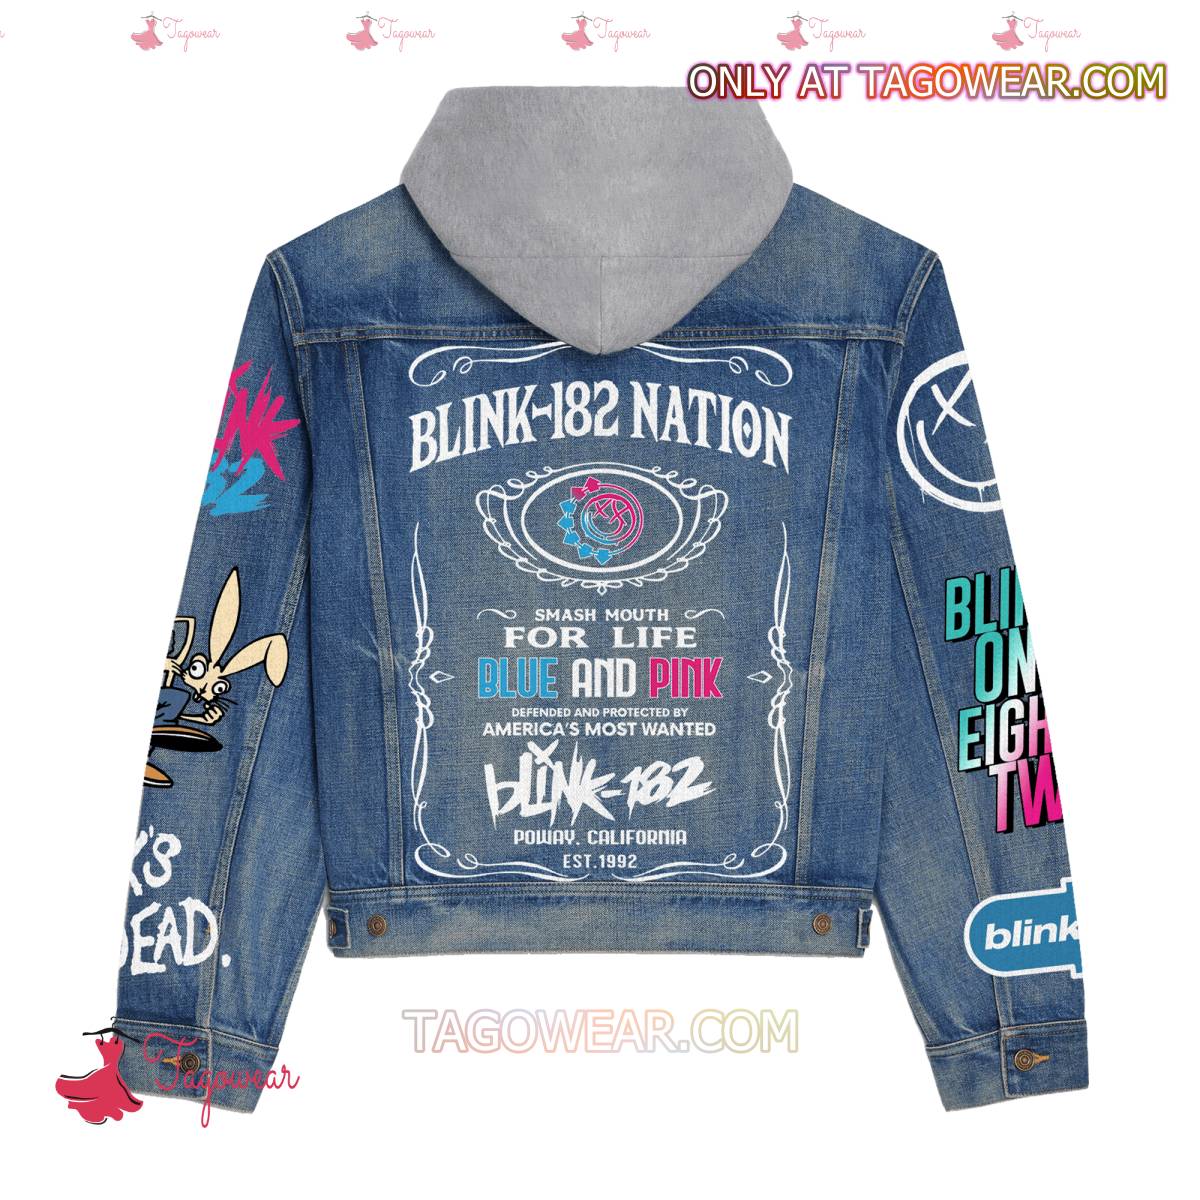 Blink-182 Nation  Smash Mouth For Life Blue And Pink Jean Hoodie Jacket b